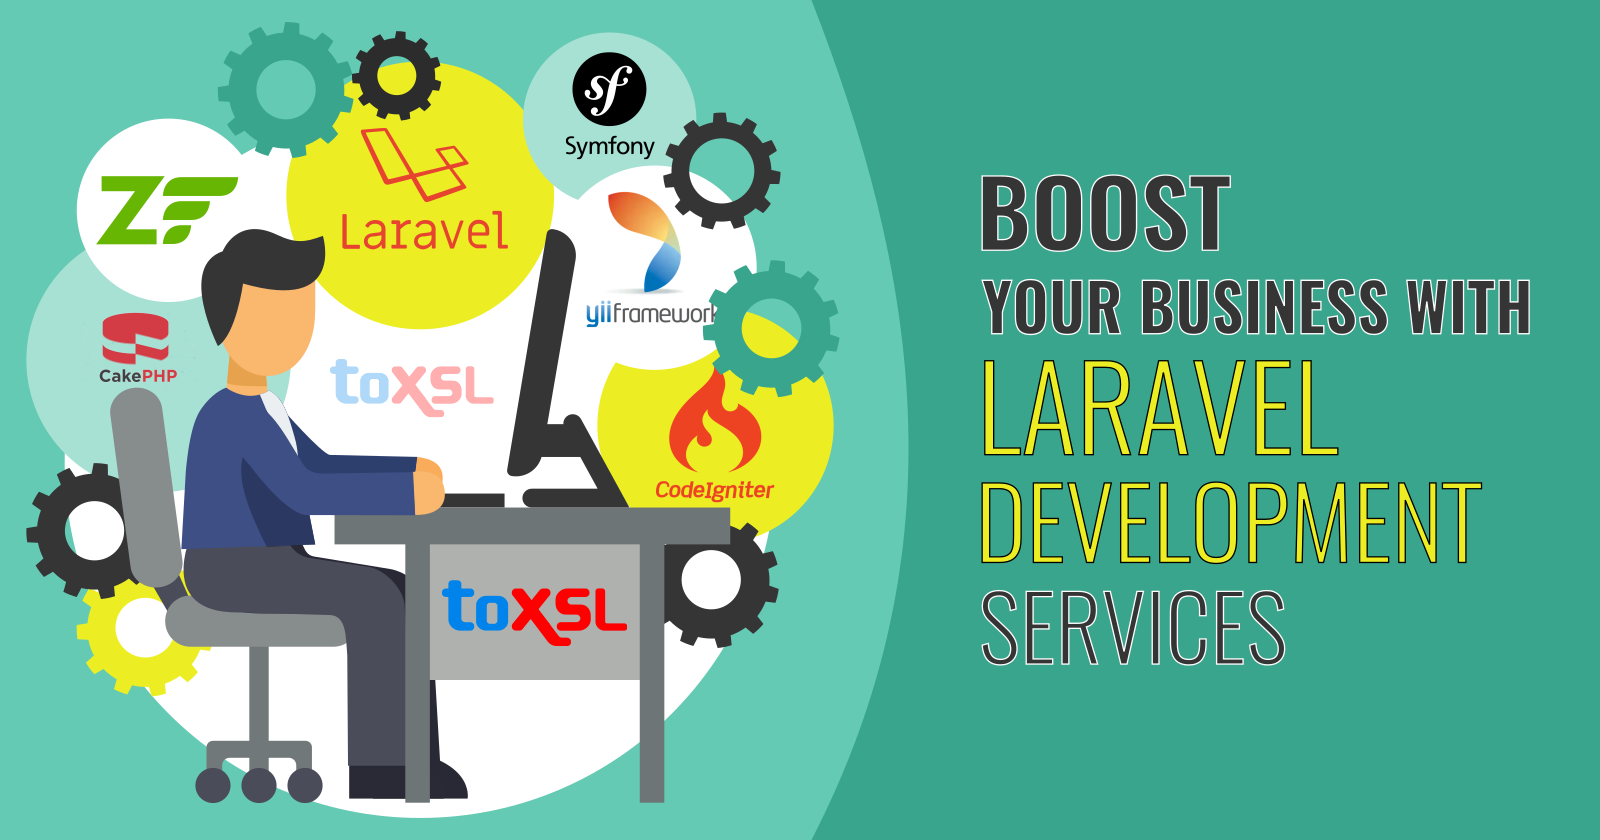 Boost Your Business With Laravel Development Services